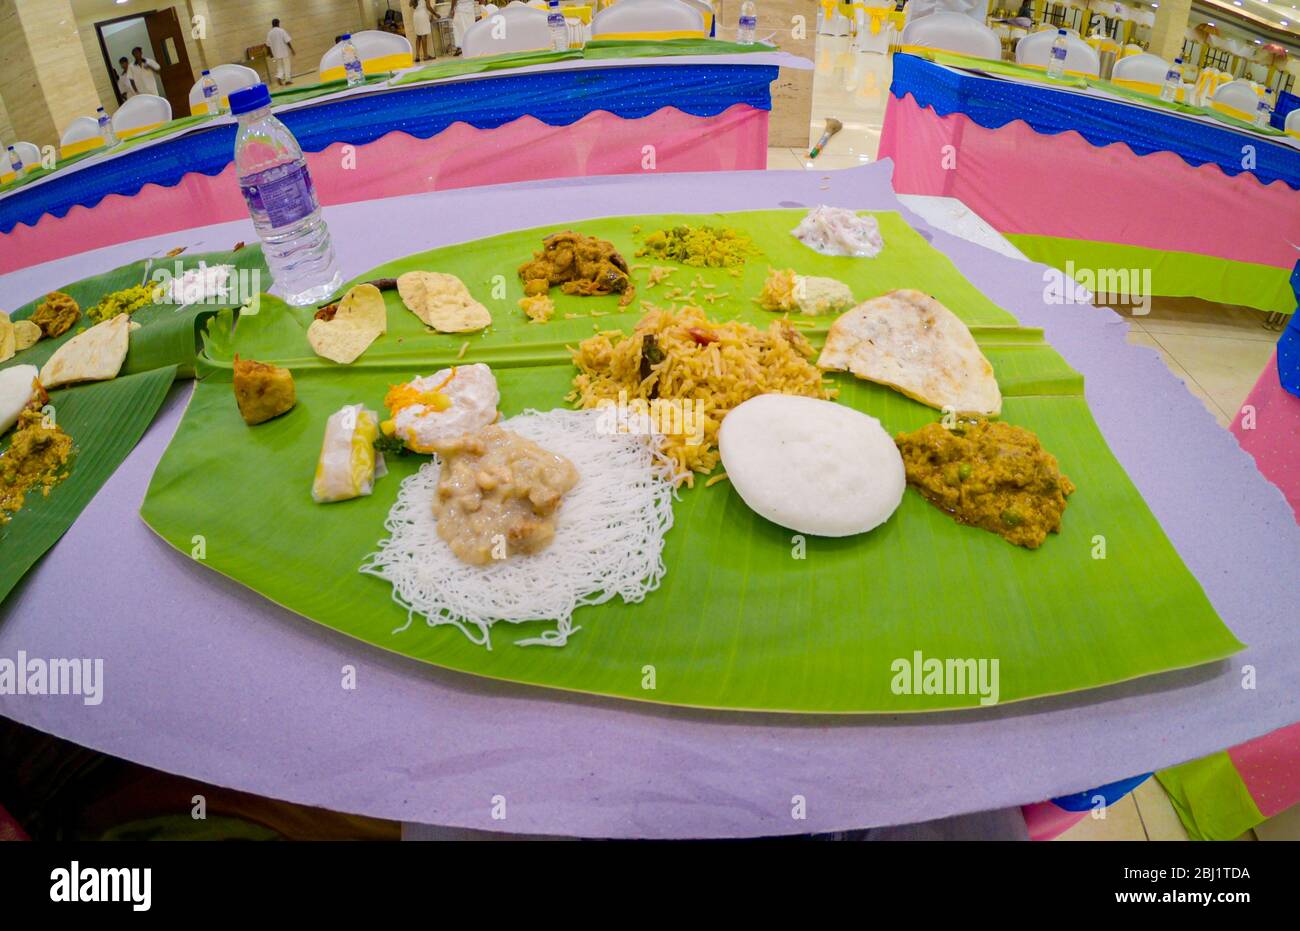 Food served on a banana leaf at a South-Indian Wedding Stock Photo